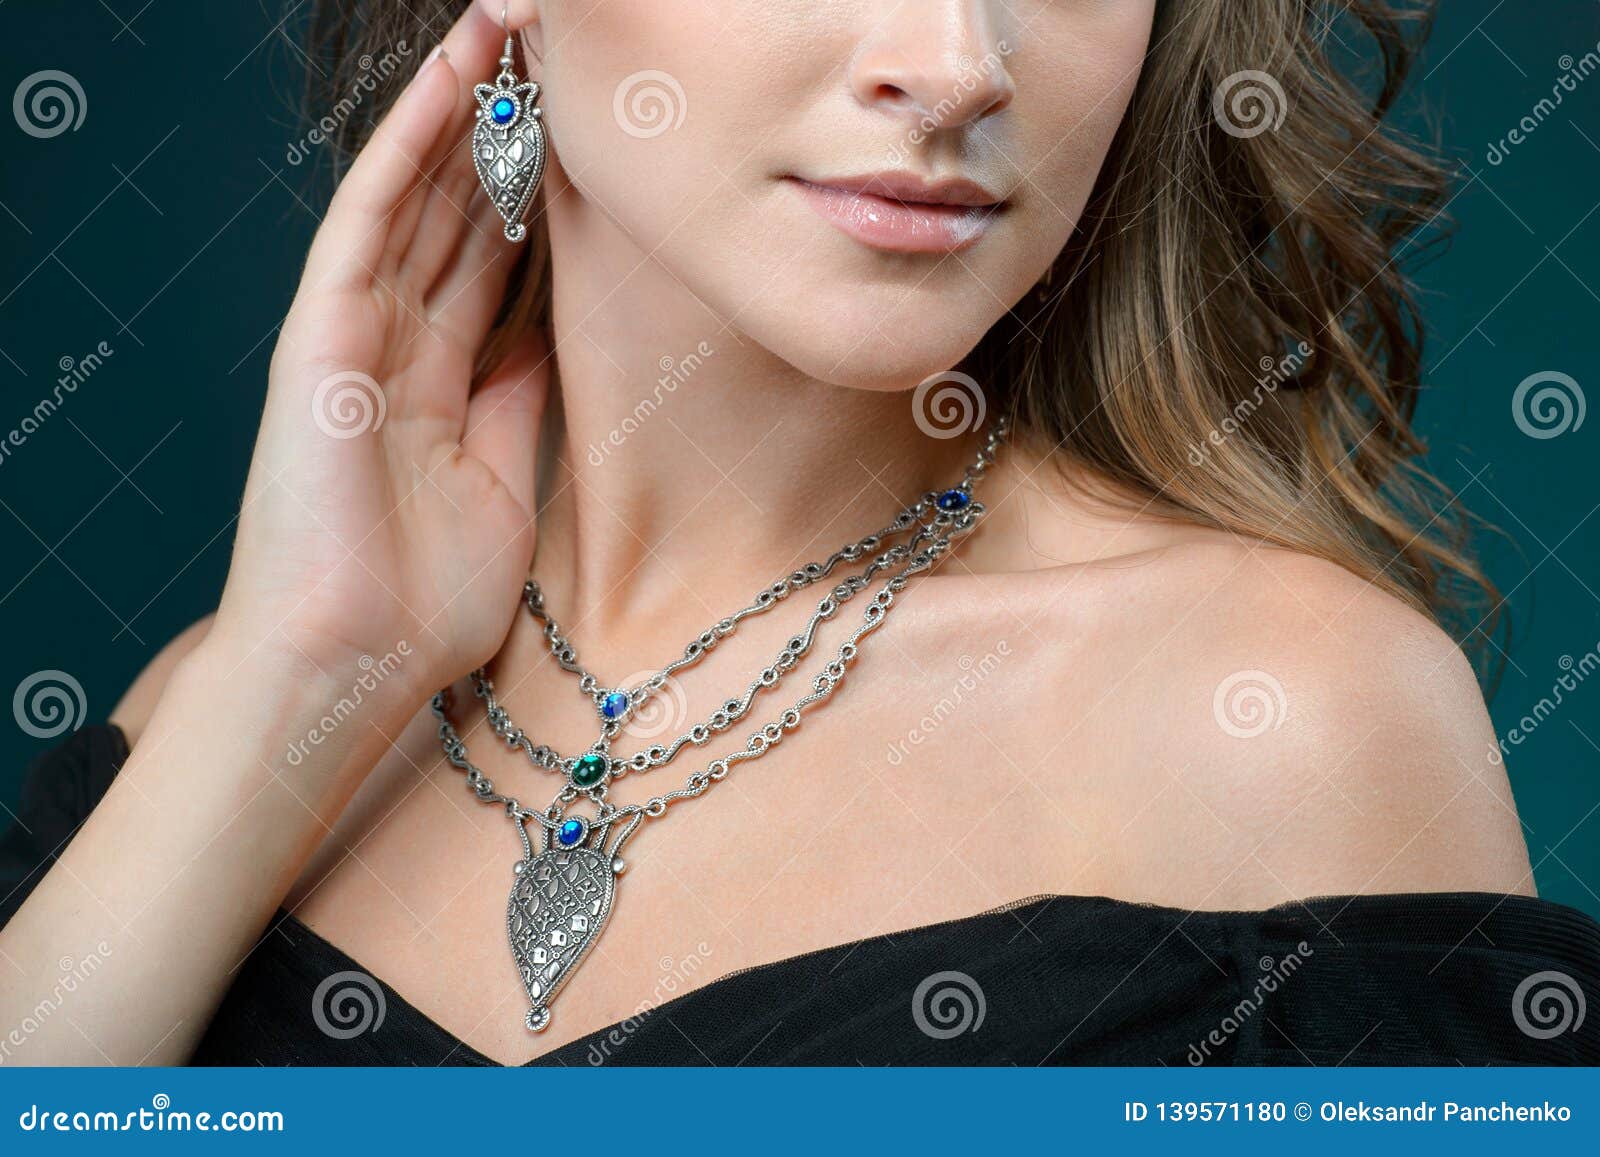 beautiful woman showing off her jewelery in fashion concept wearing accessories and jewelry  over dark background